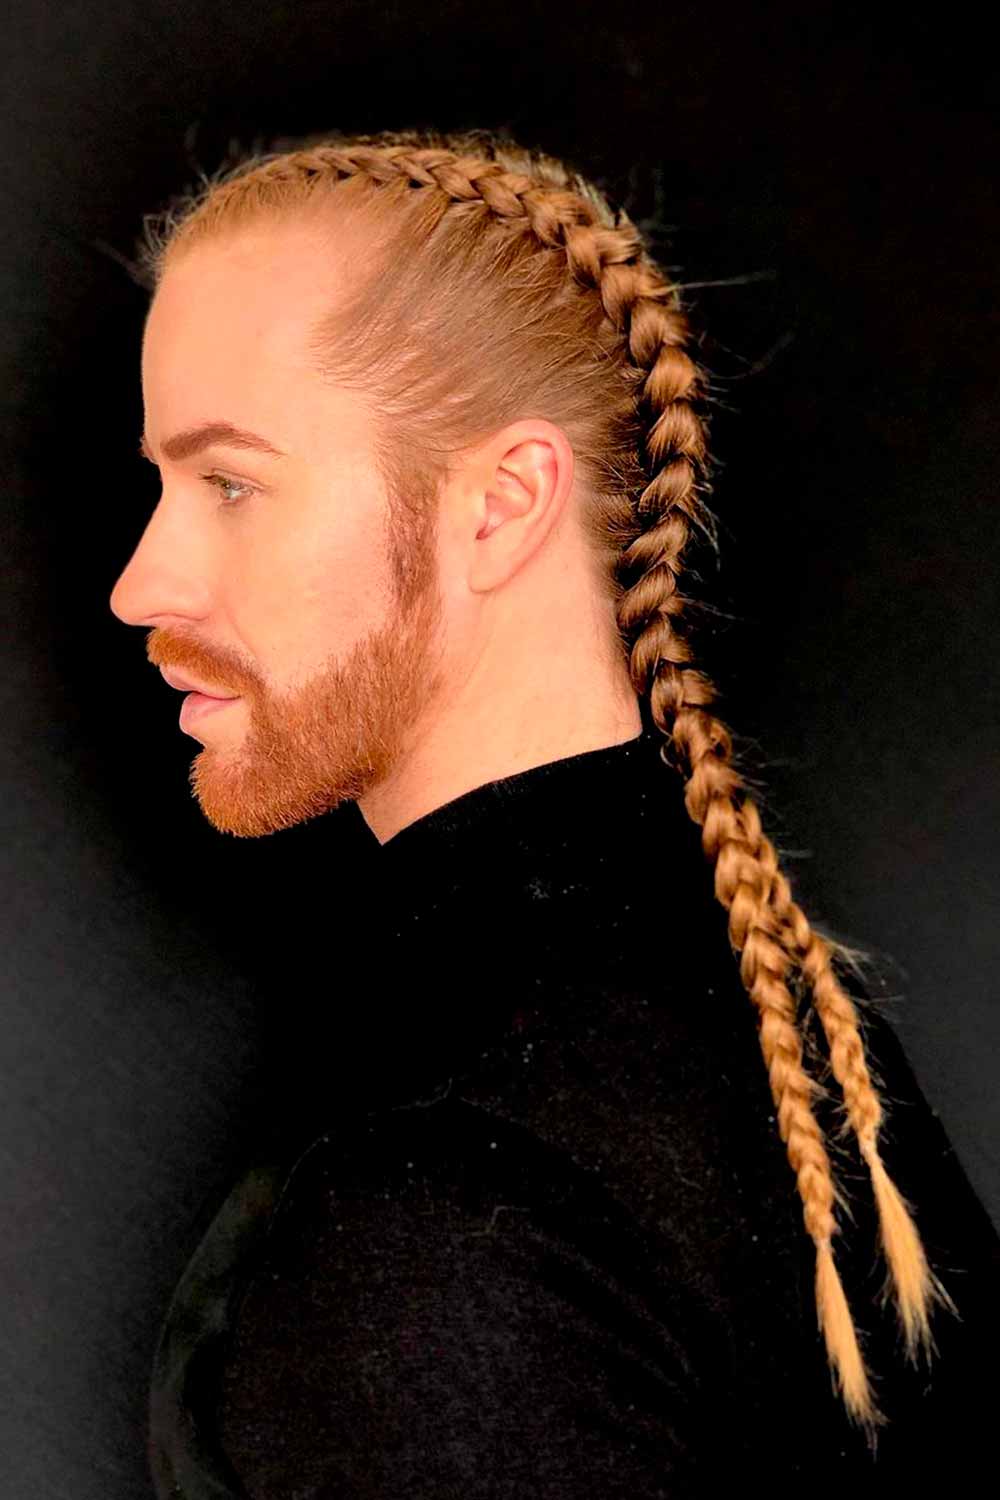 Top 100 Braids For Men To Copy This Year - Mens Haircuts